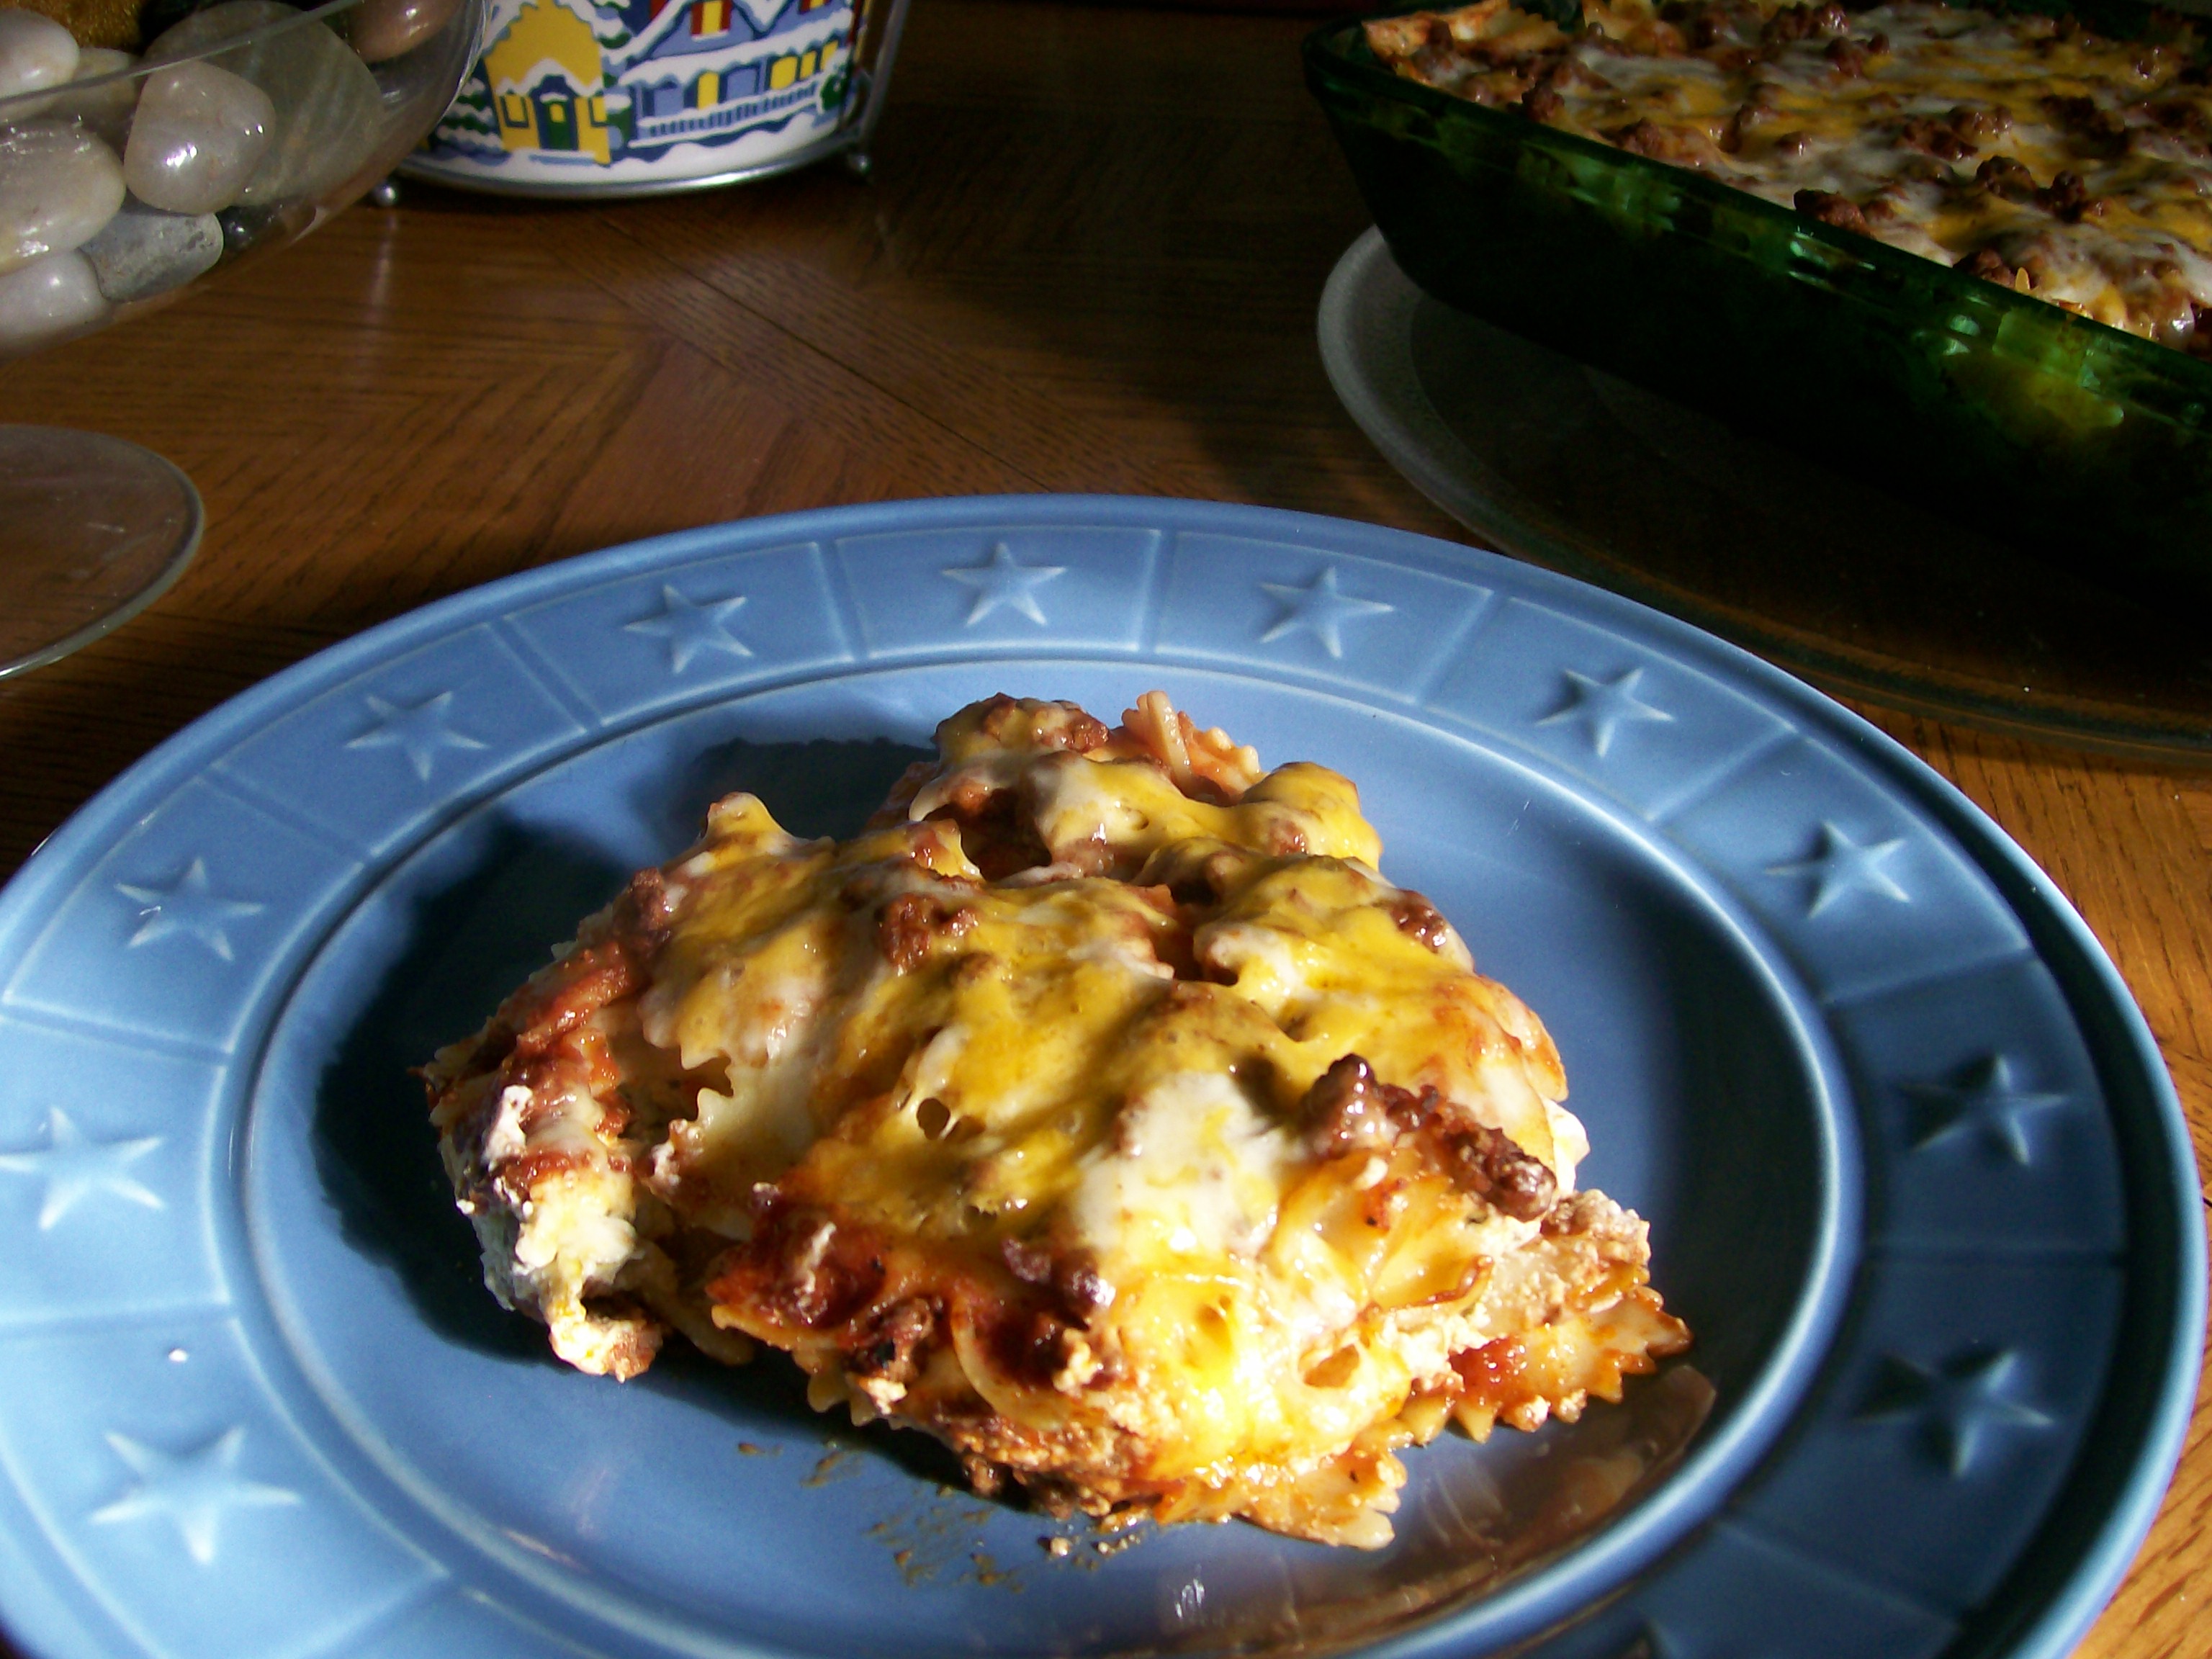 SOUR CREAM AND GROUND BEEF LAYERED CASSEROLE